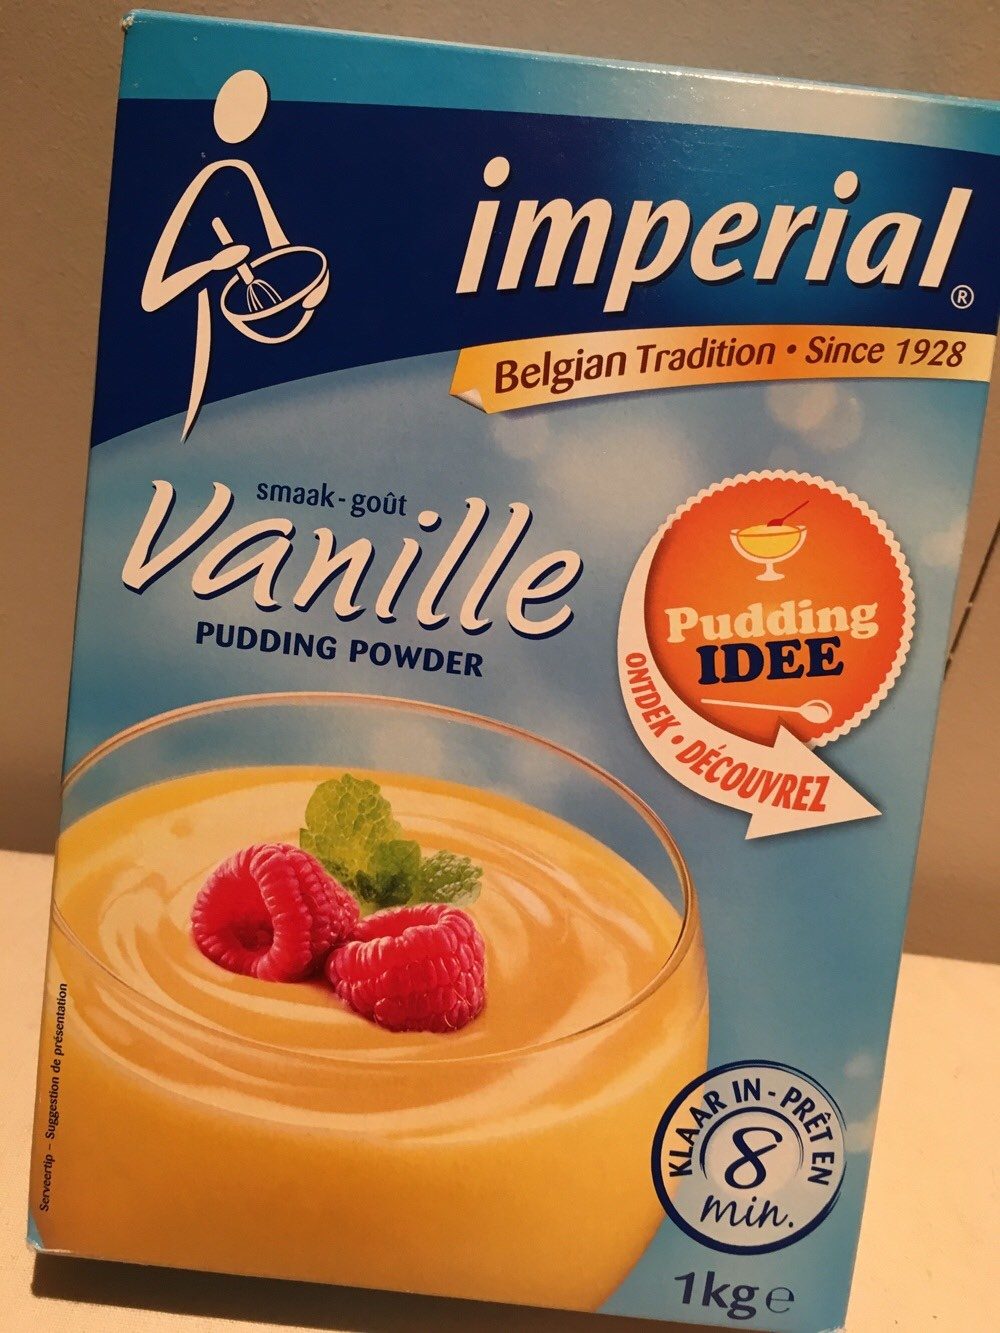 Impérial poudre pudding vanille - Product - fr